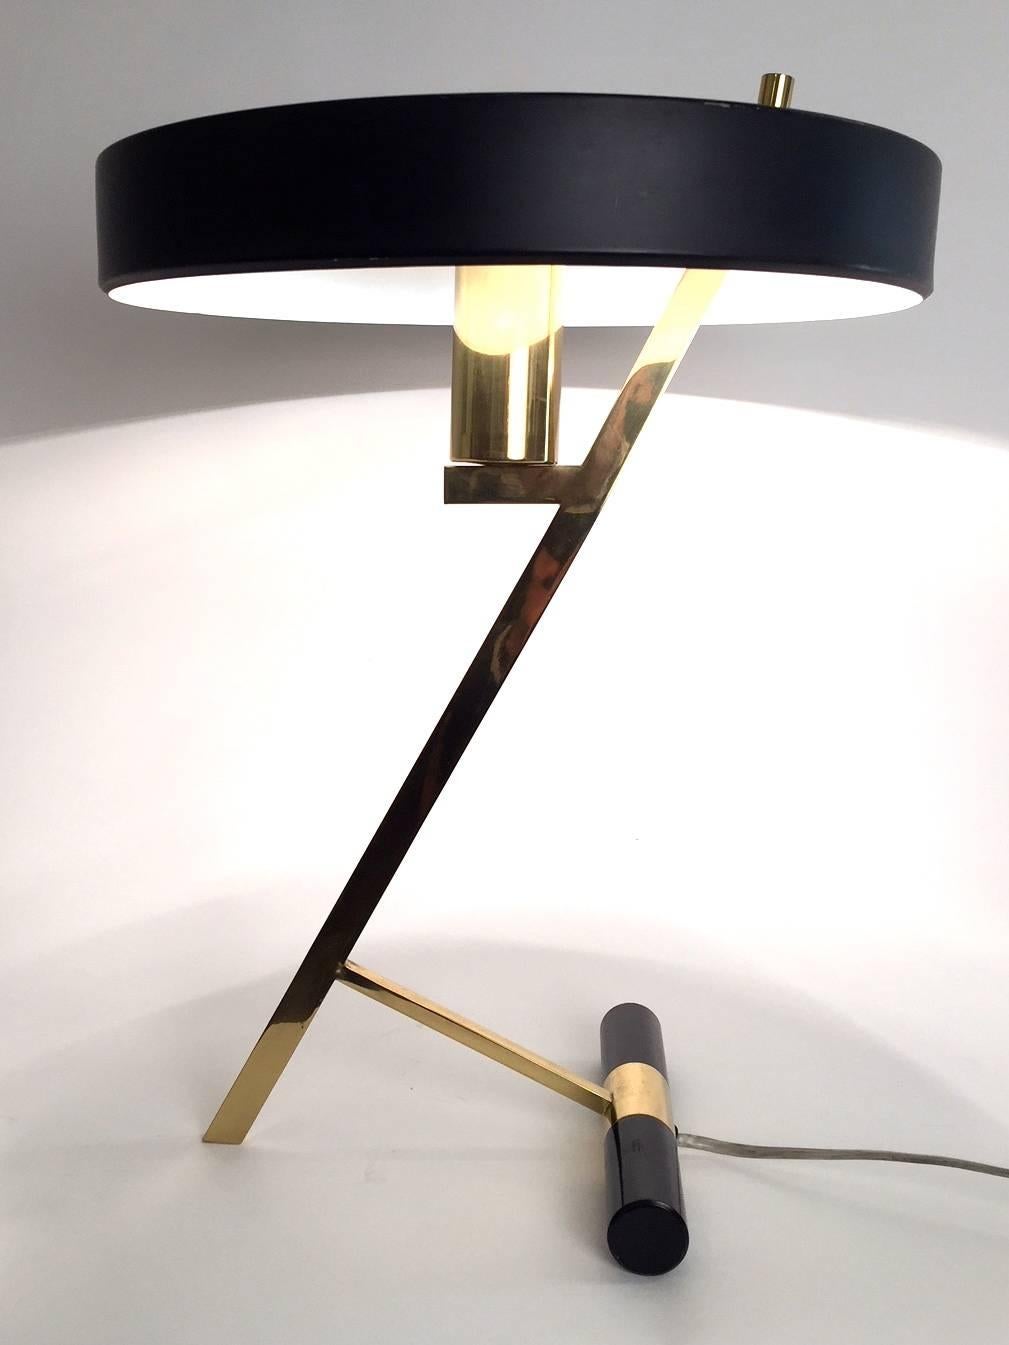 A Z-shaped table lamp designed by Louis Kalff and edited by Phillips in 1953 .Enameled black metal, round shaped shade and brass base. Excellent condition.